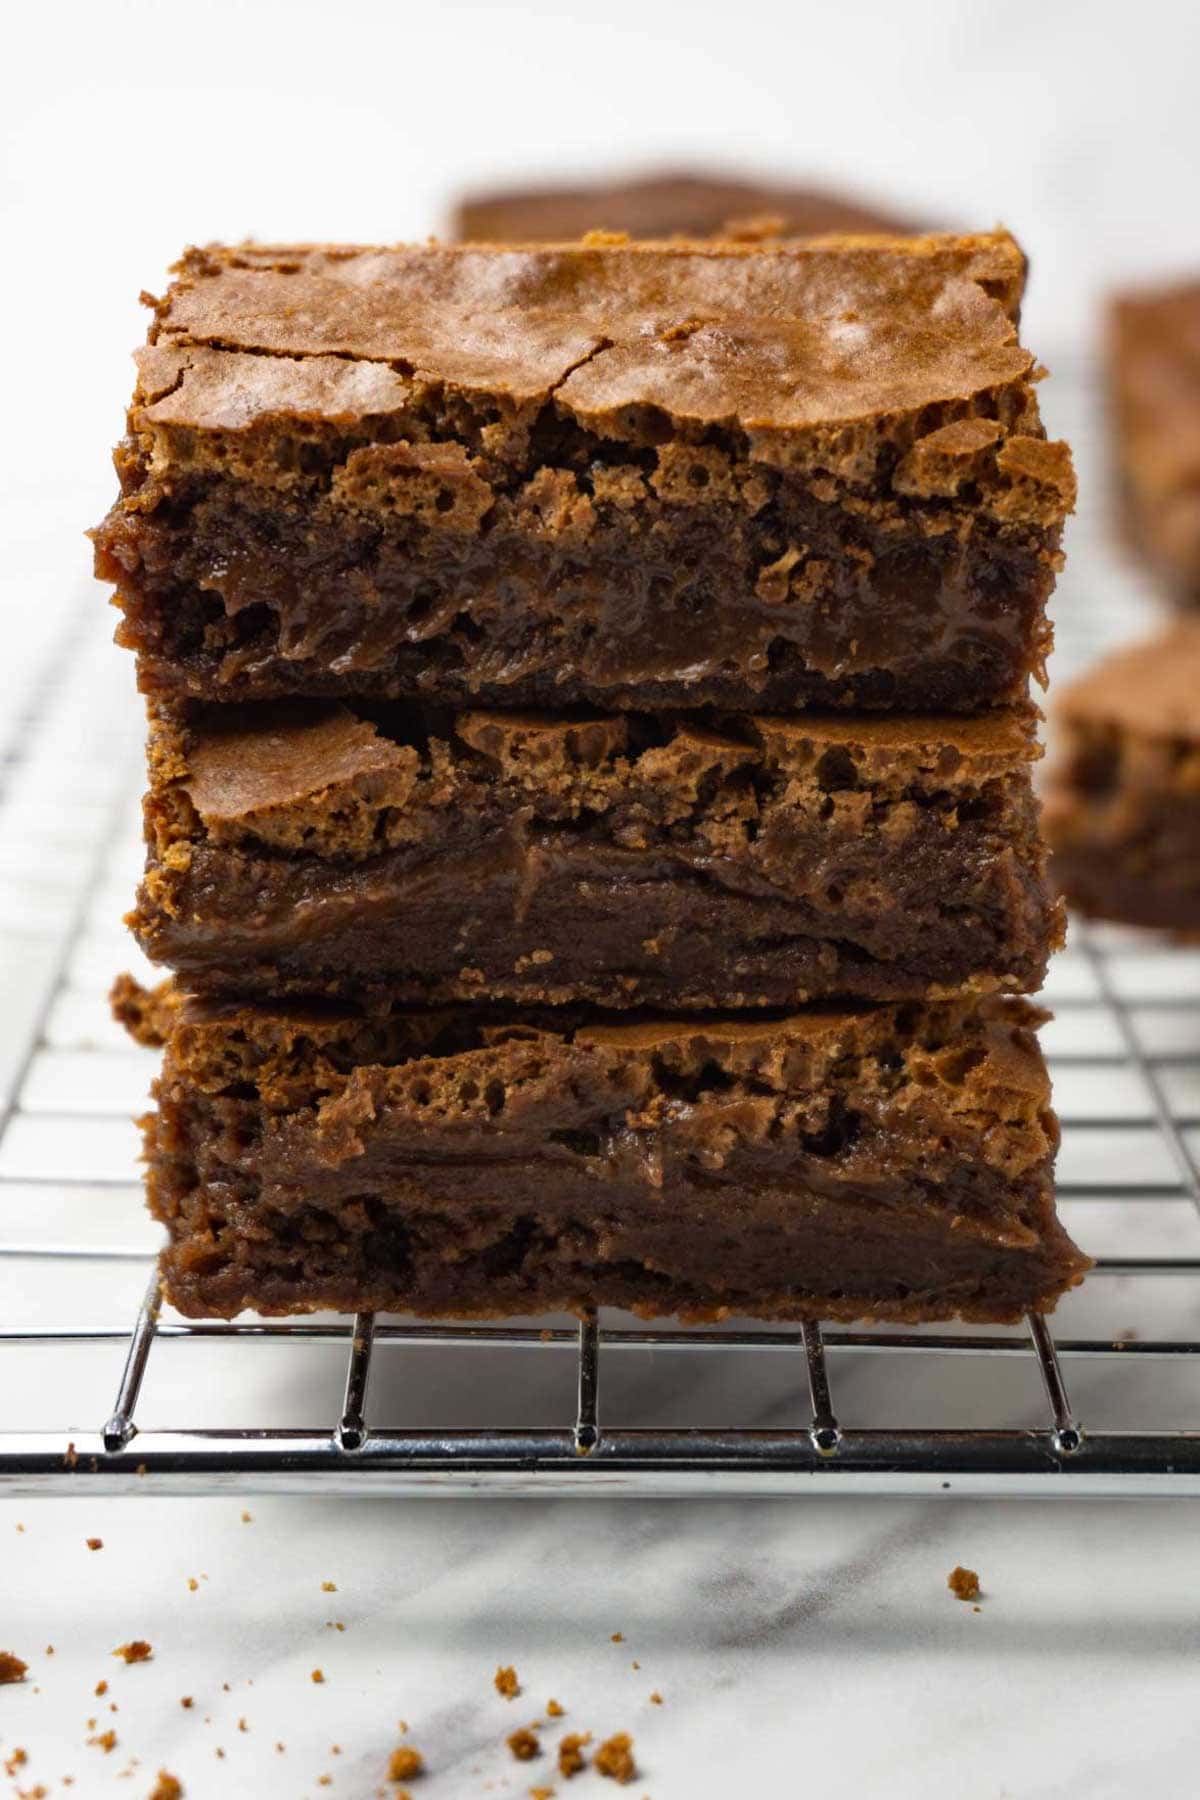 Three brownies are stacked on top of each other on a metal cooling rack.